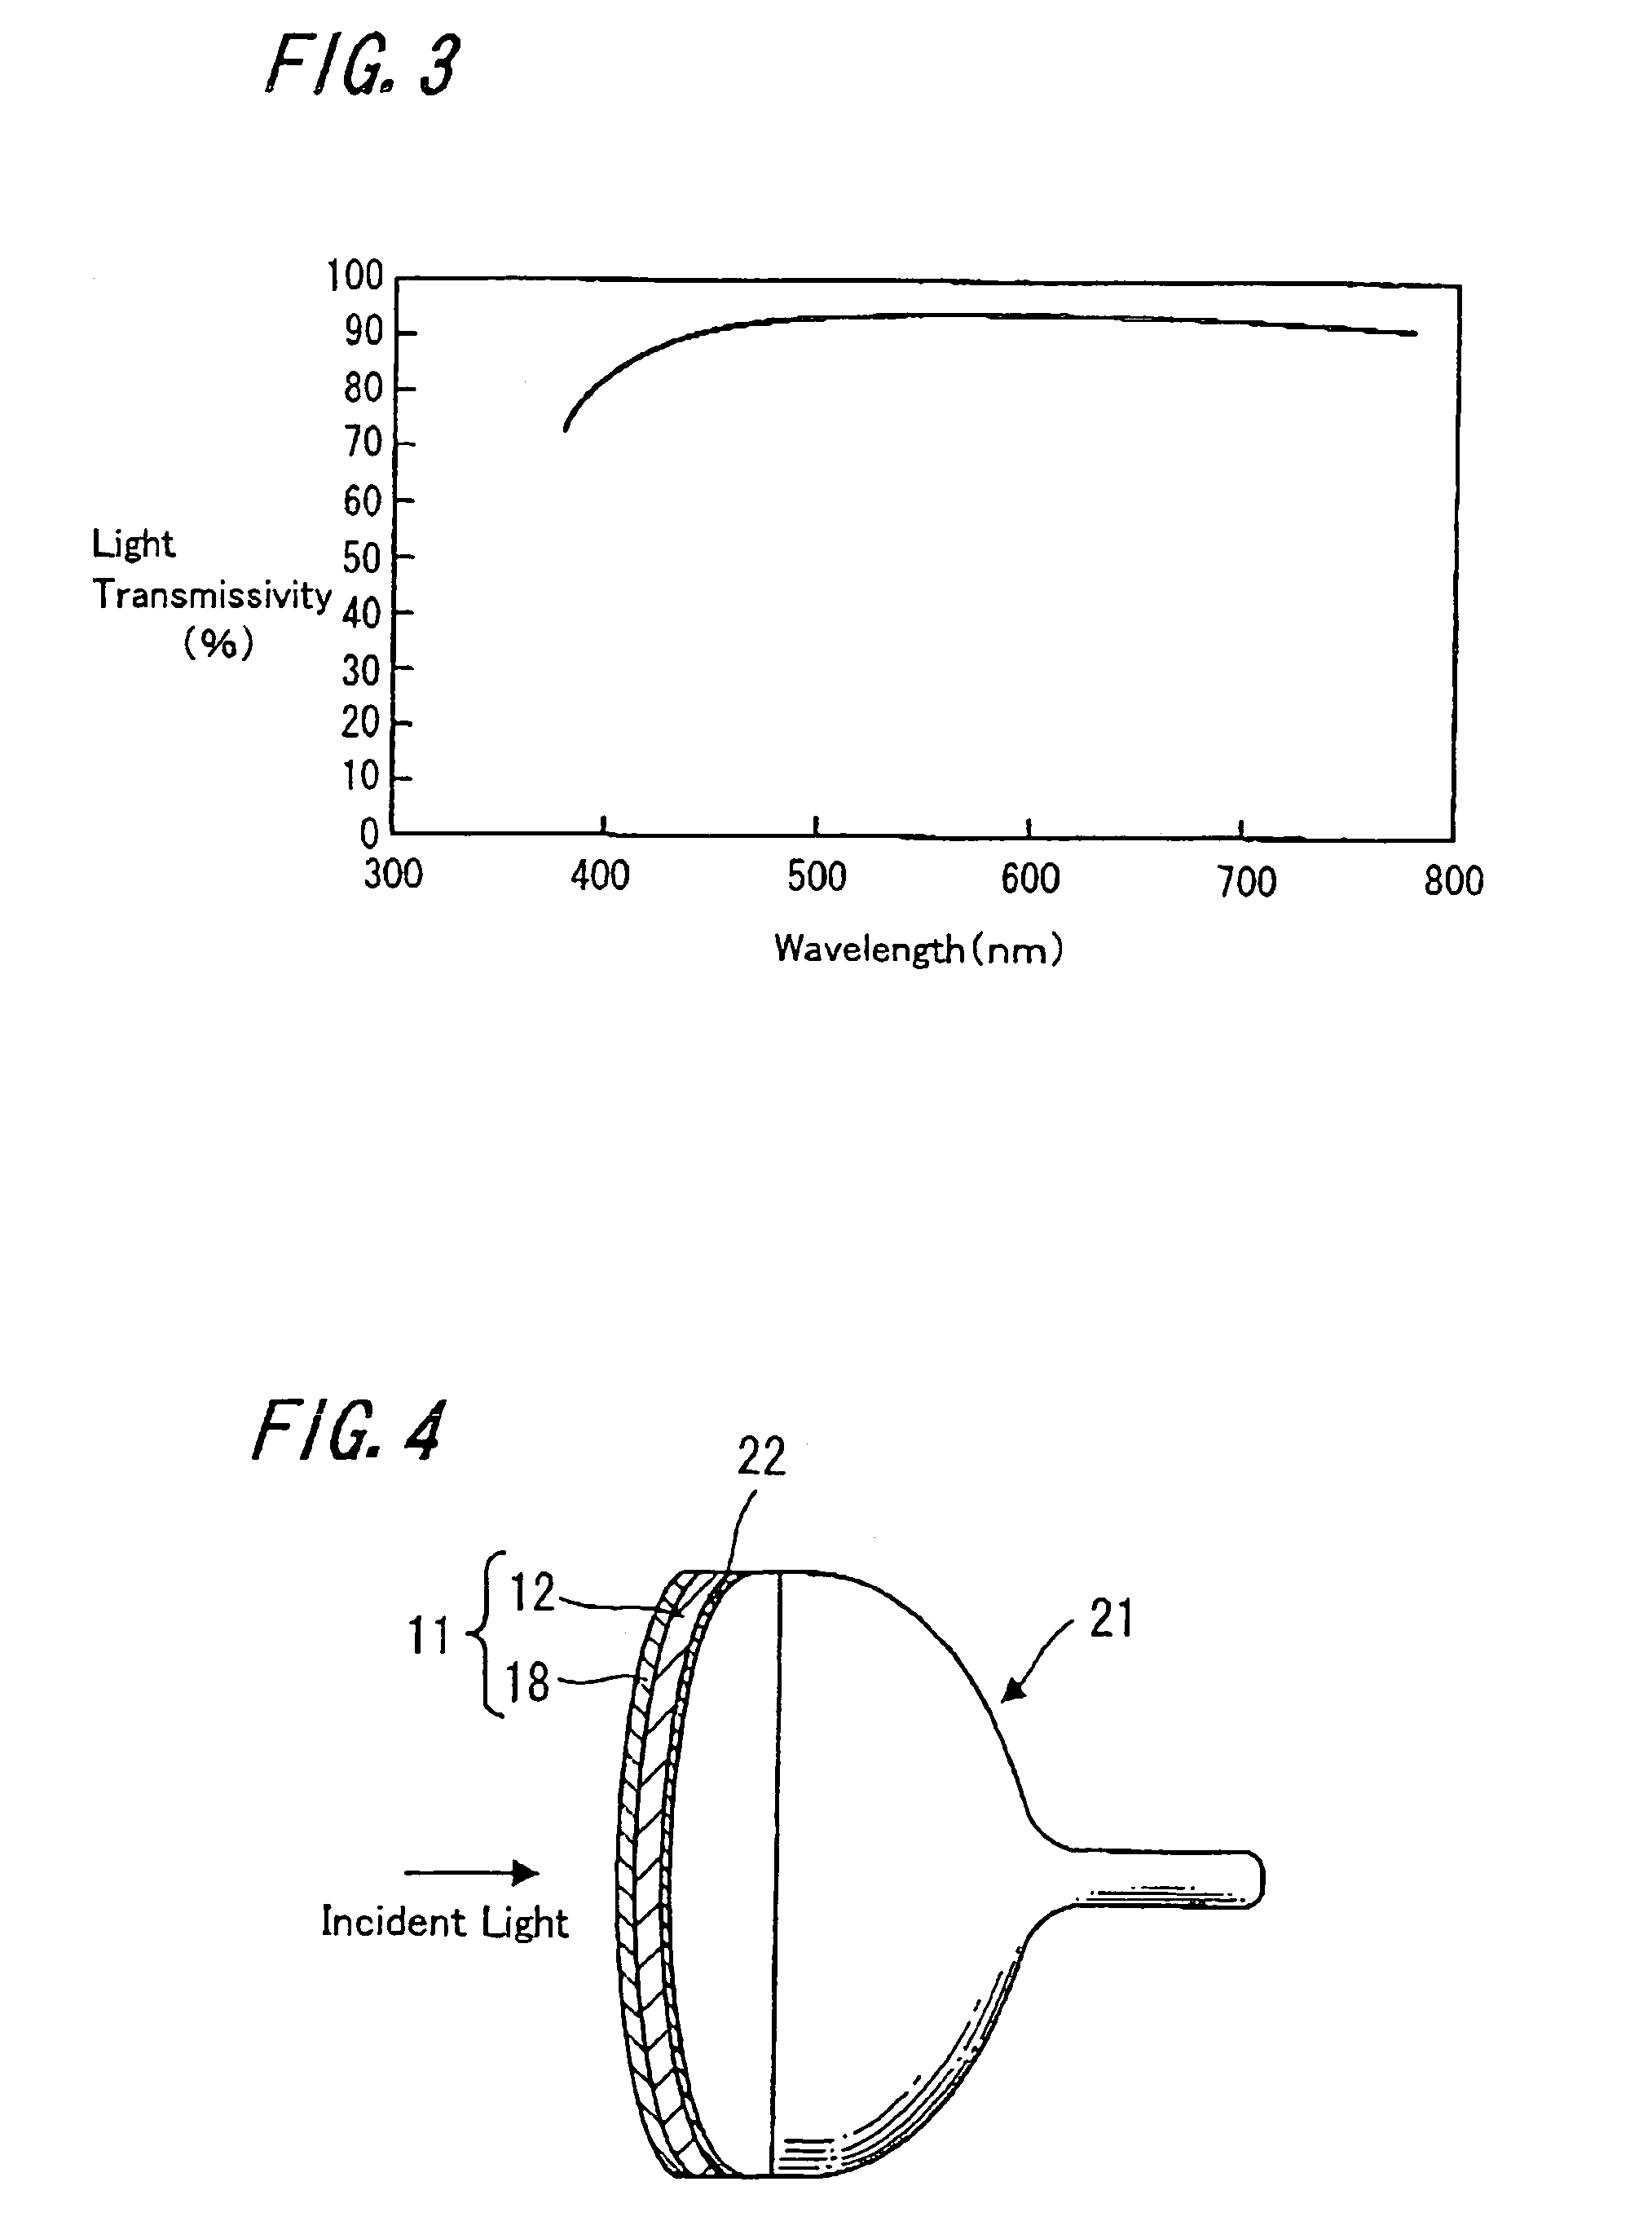 Display apparatus and antireflection substance